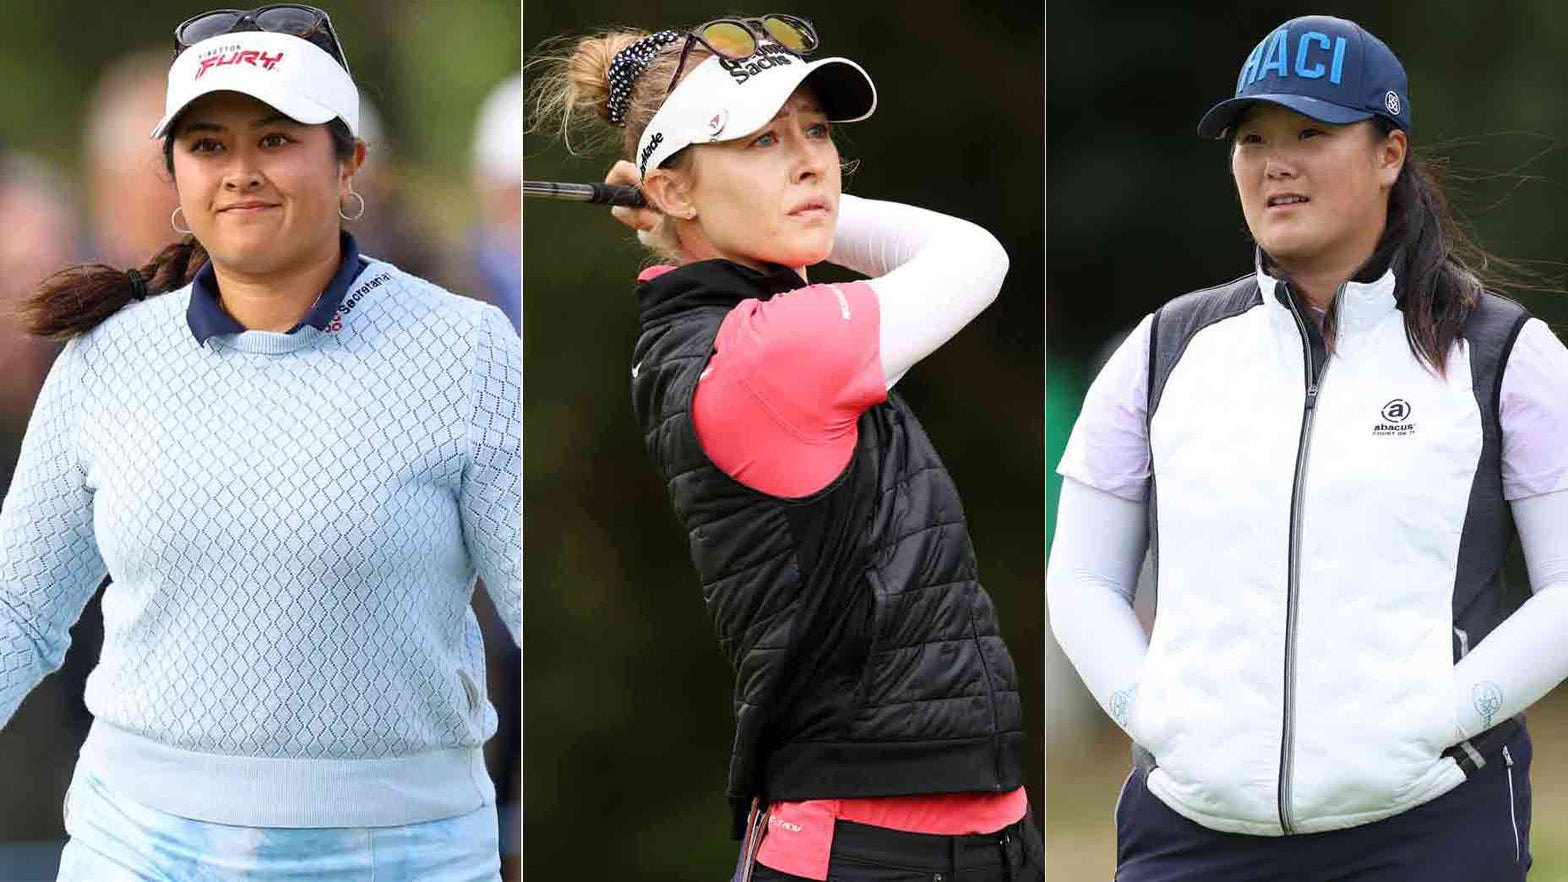 Tightlypacked leaderboard fuels hope for U.S. victory at Women's Open